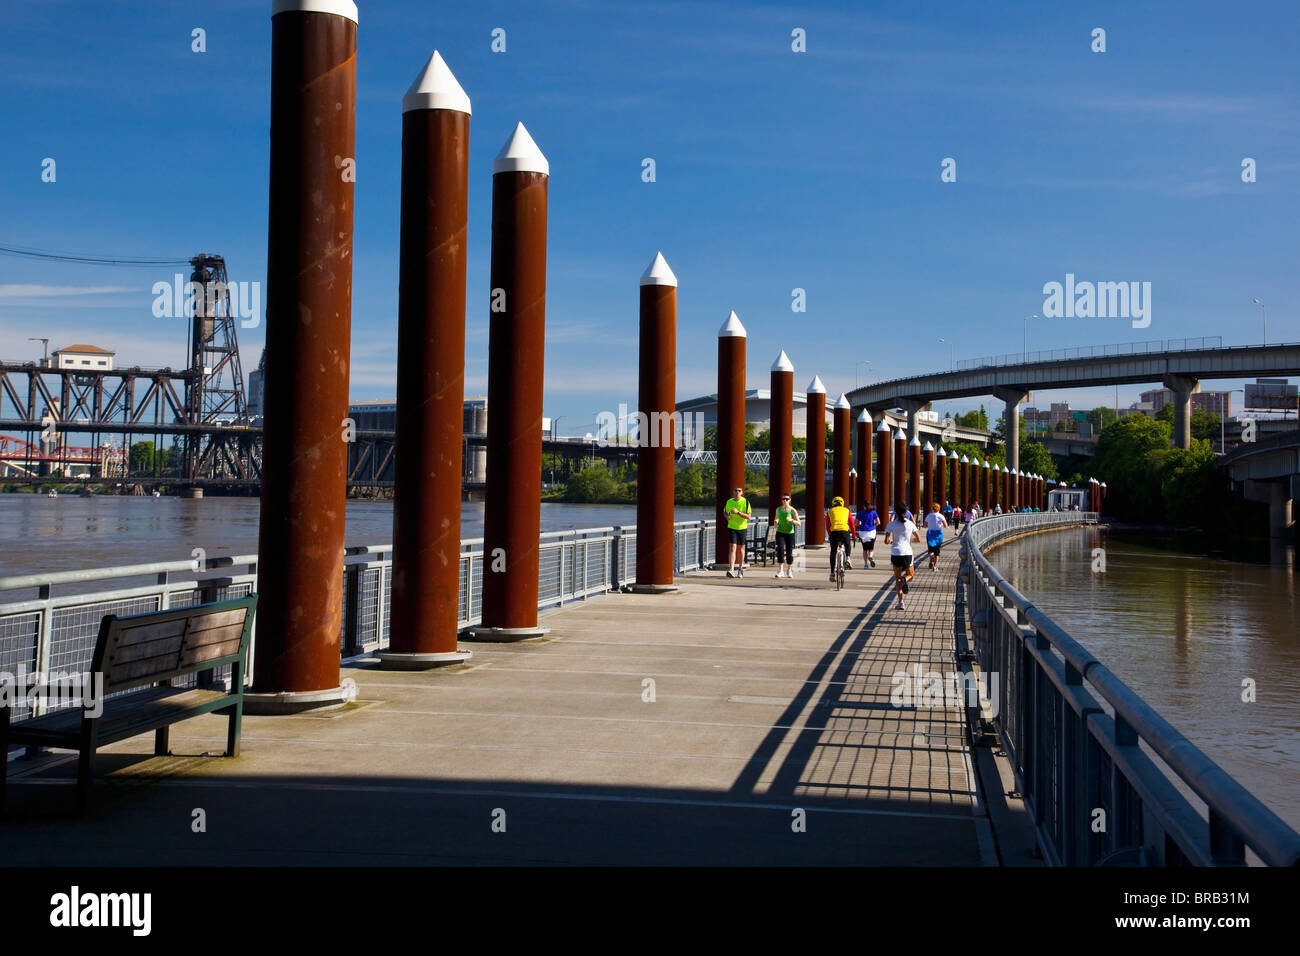 People Running, Cycling And Walking Over A Bridge On The Willamette River; Portland, Oregon, United States Of America Stock Photo